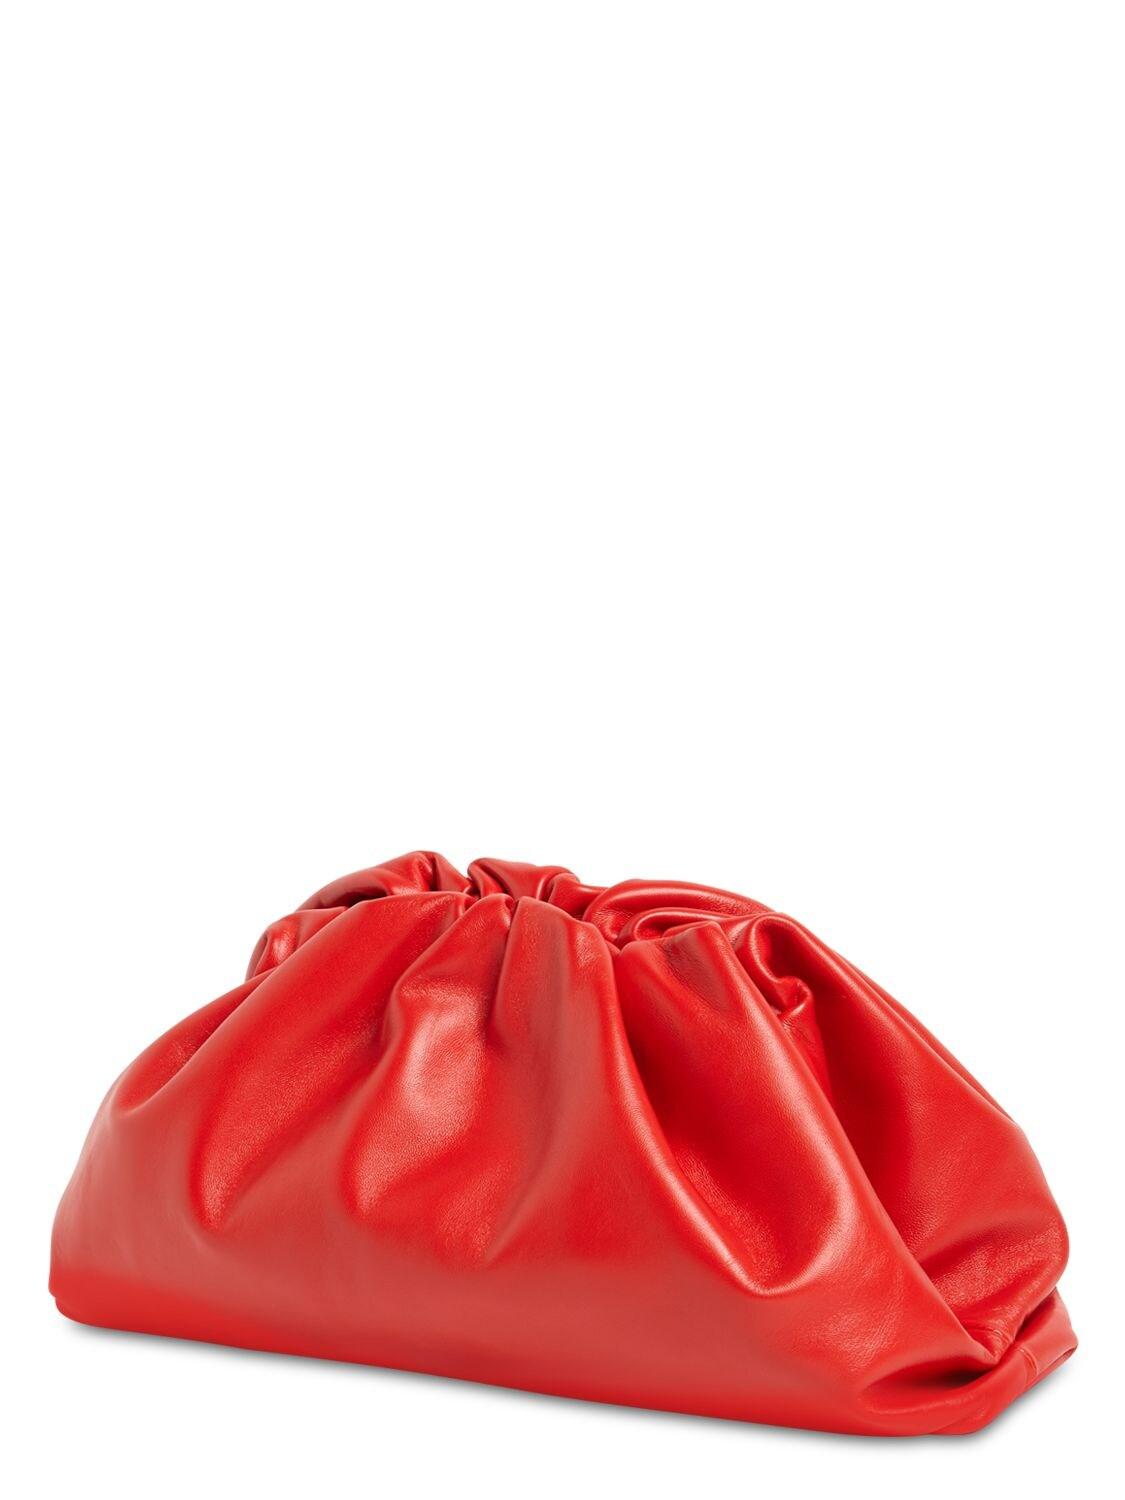 Bottega Veneta The Pouch Smooth Leather Bag in Red - Lyst